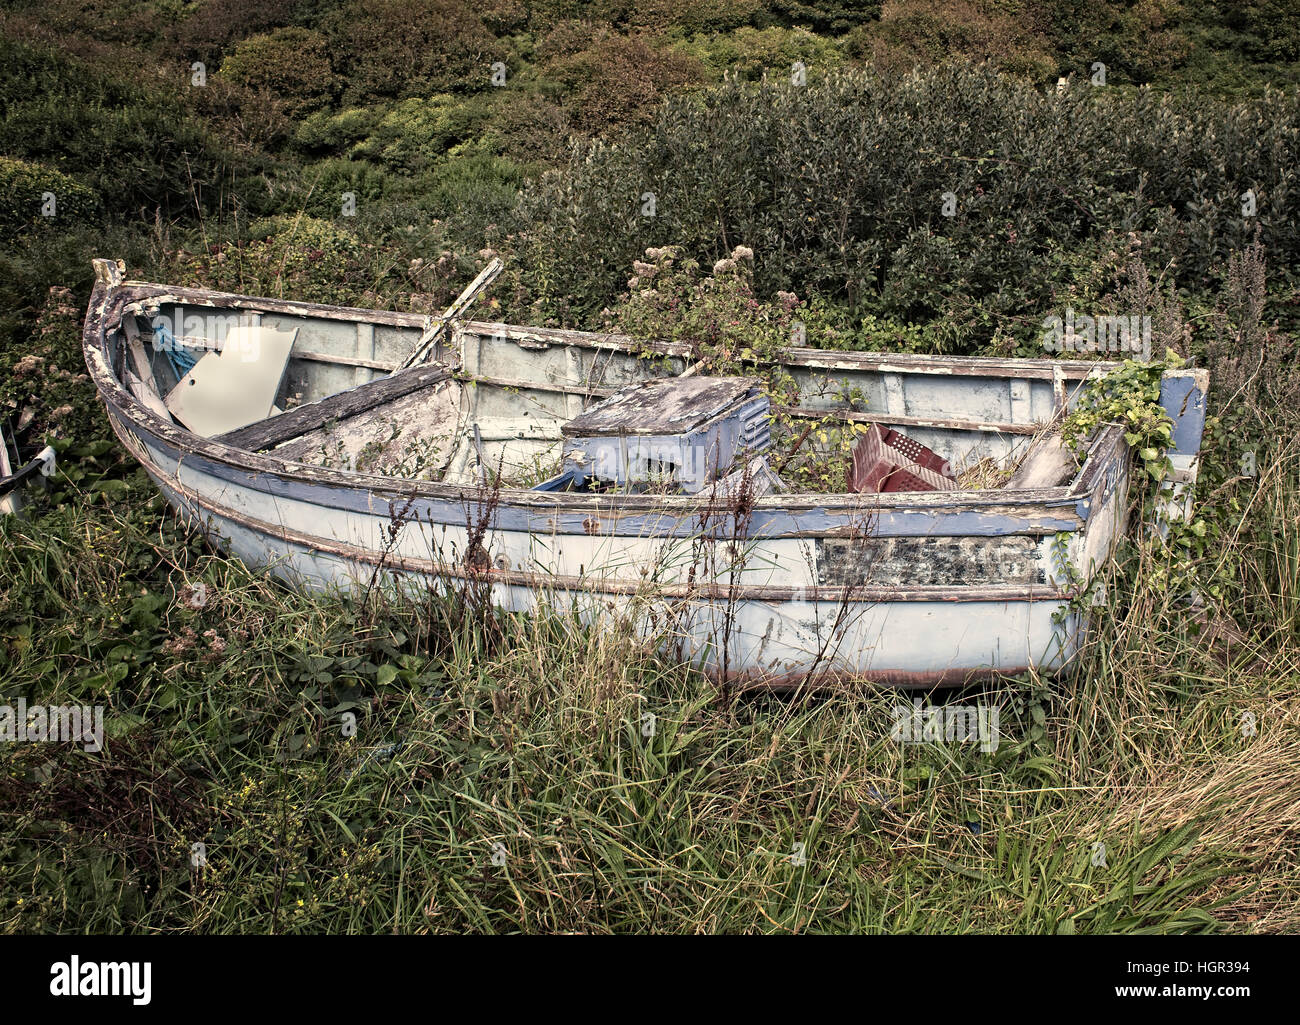 Neglected fishing boat, decaying in the hedge, Penberth, Cornwall, England, UK. Stock Photo